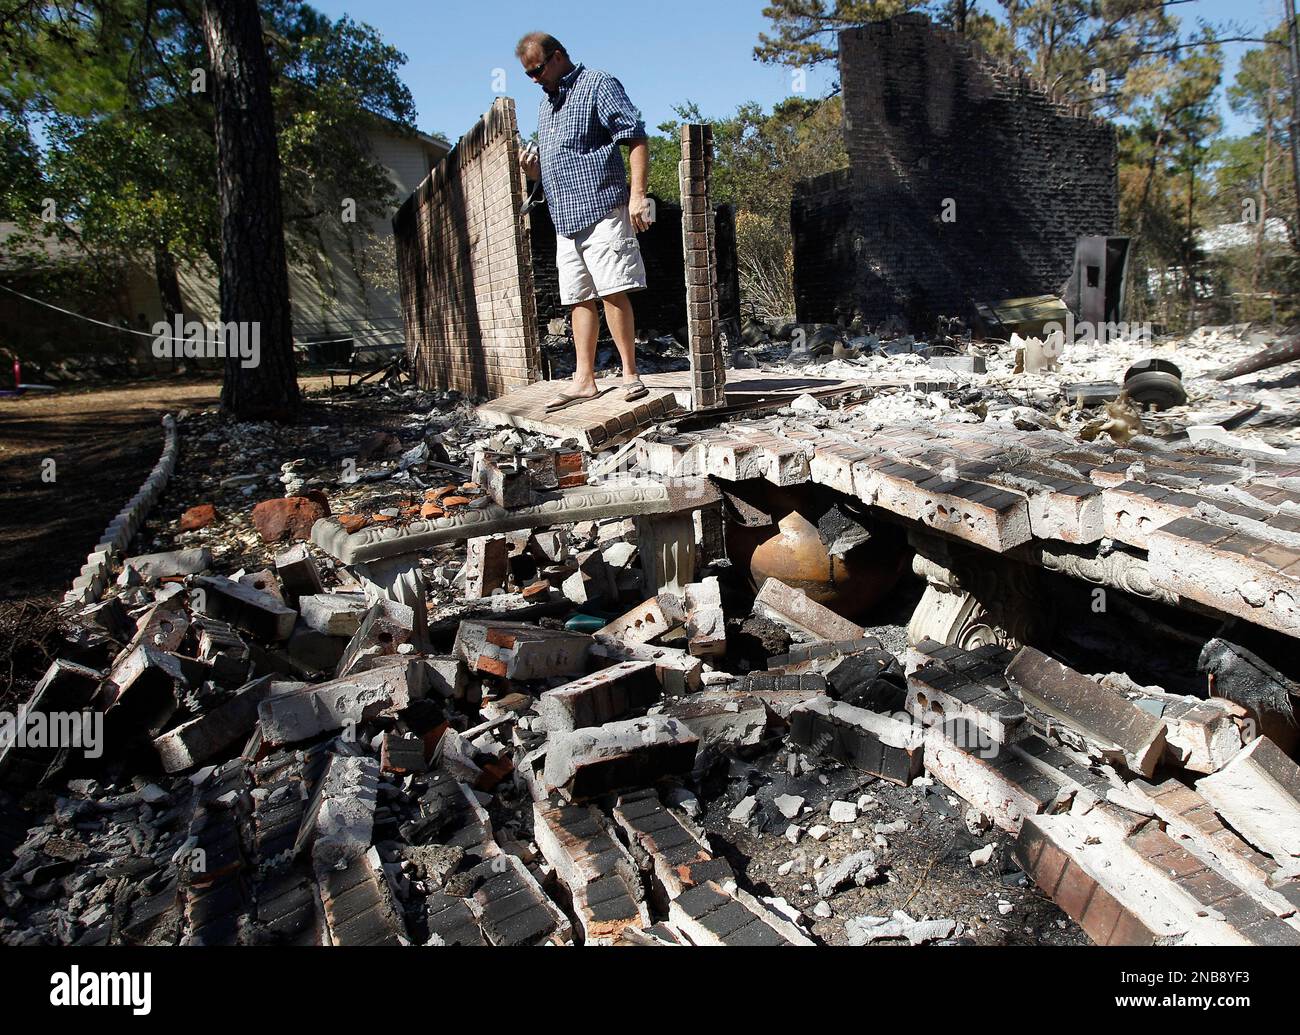 Robert King looks through the remains of her home that was destroyed by  wildfires, Thursday, Sept. 8, 2011, in Bastrop, Texas. The fire has  destroyed more than 1,000 homes and blackened about